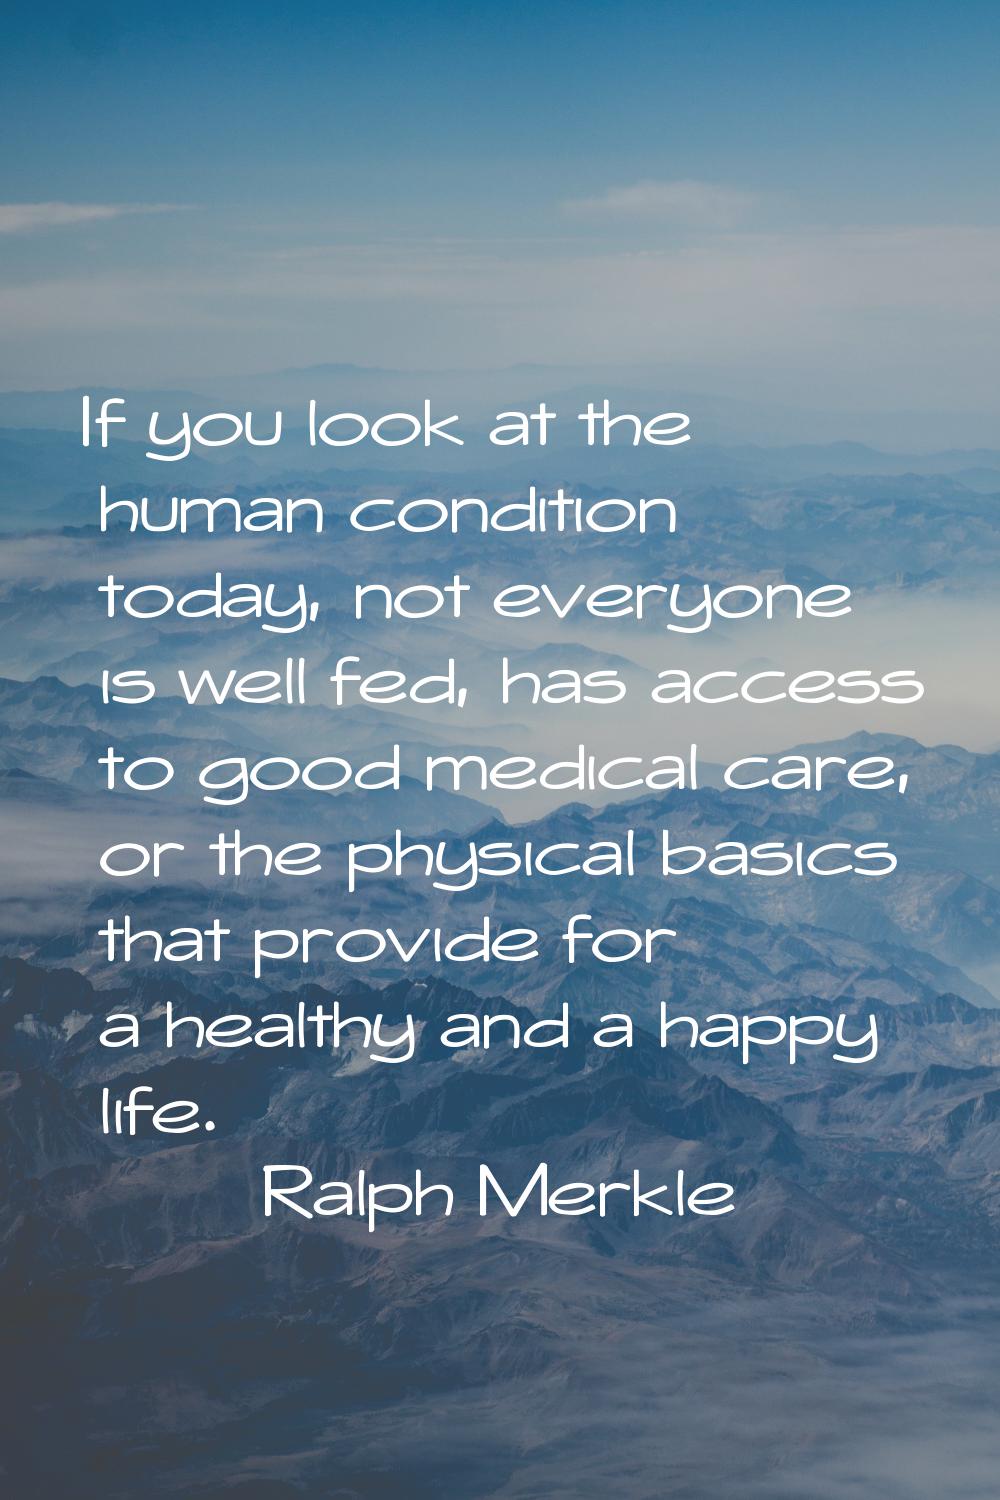 If you look at the human condition today, not everyone is well fed, has access to good medical care